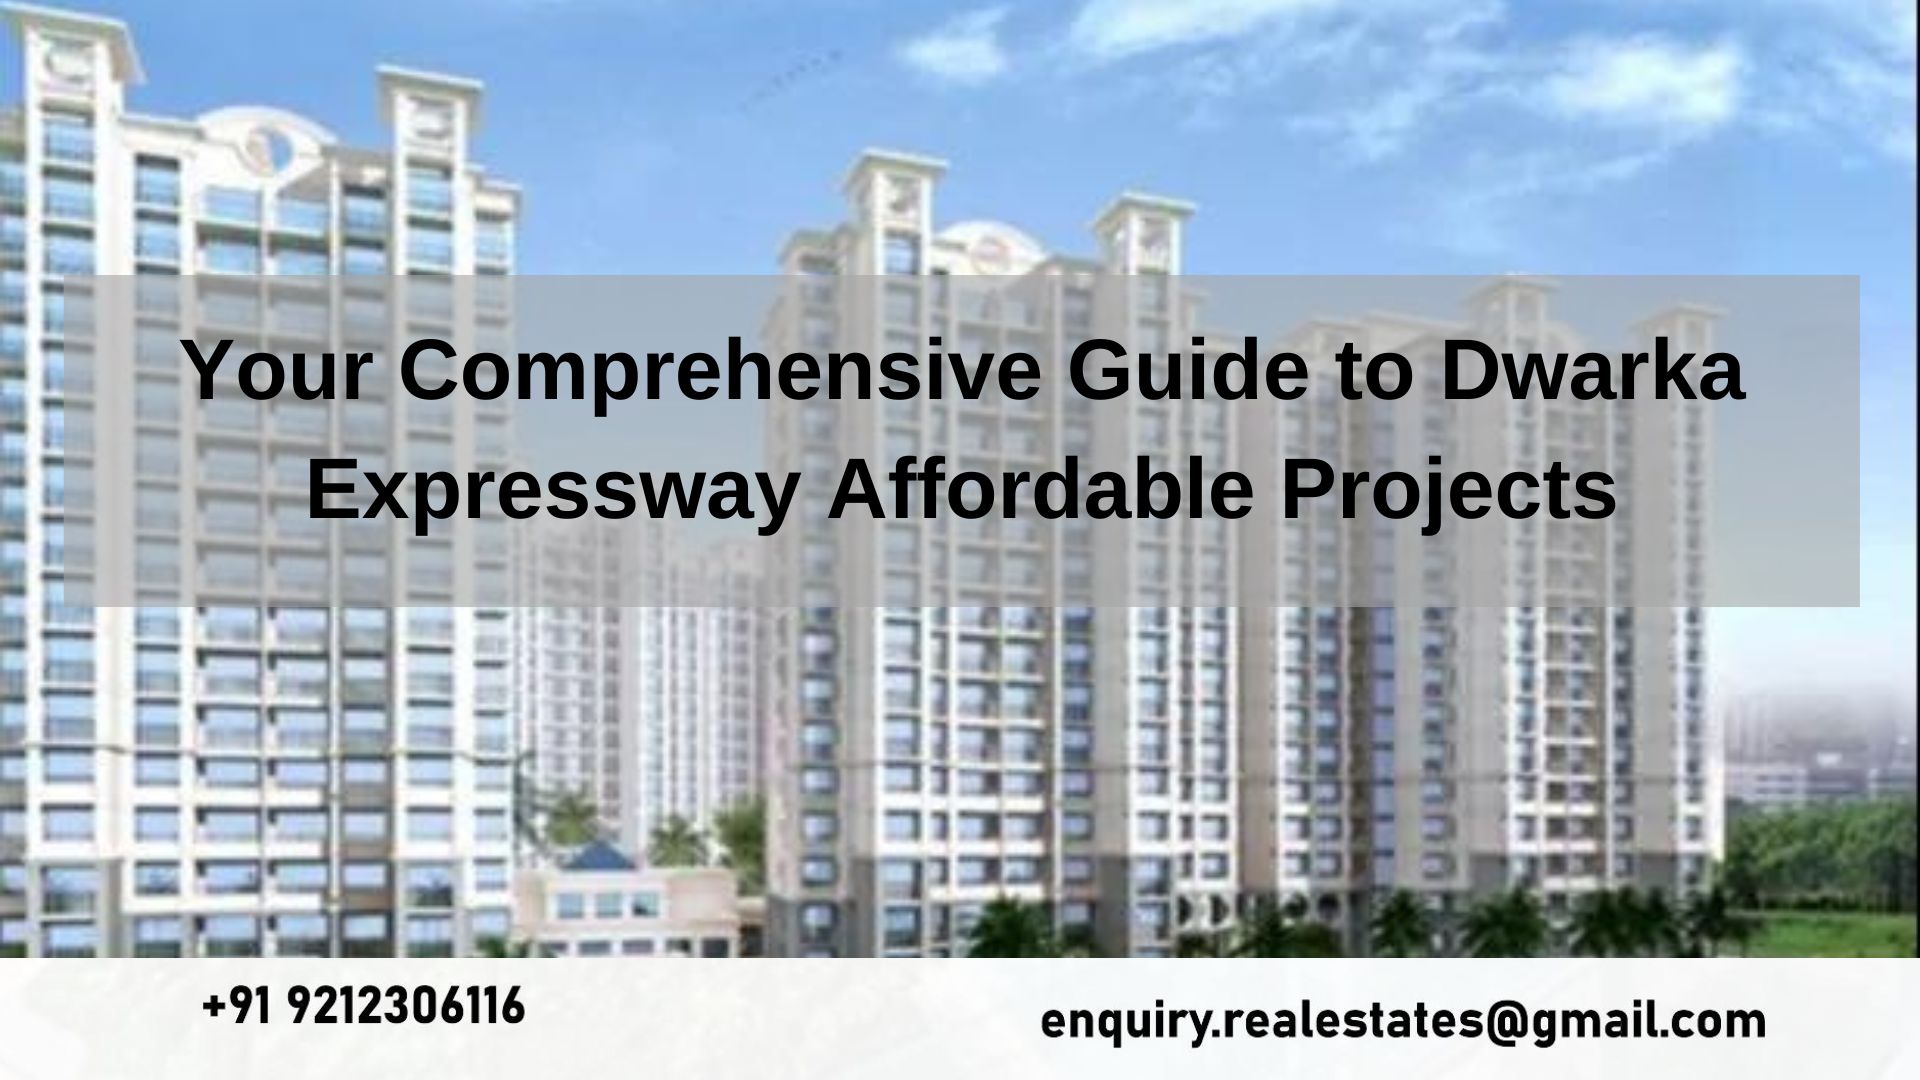 Your Comprehensive Guide to Dwarka Expressway Affordable Projects